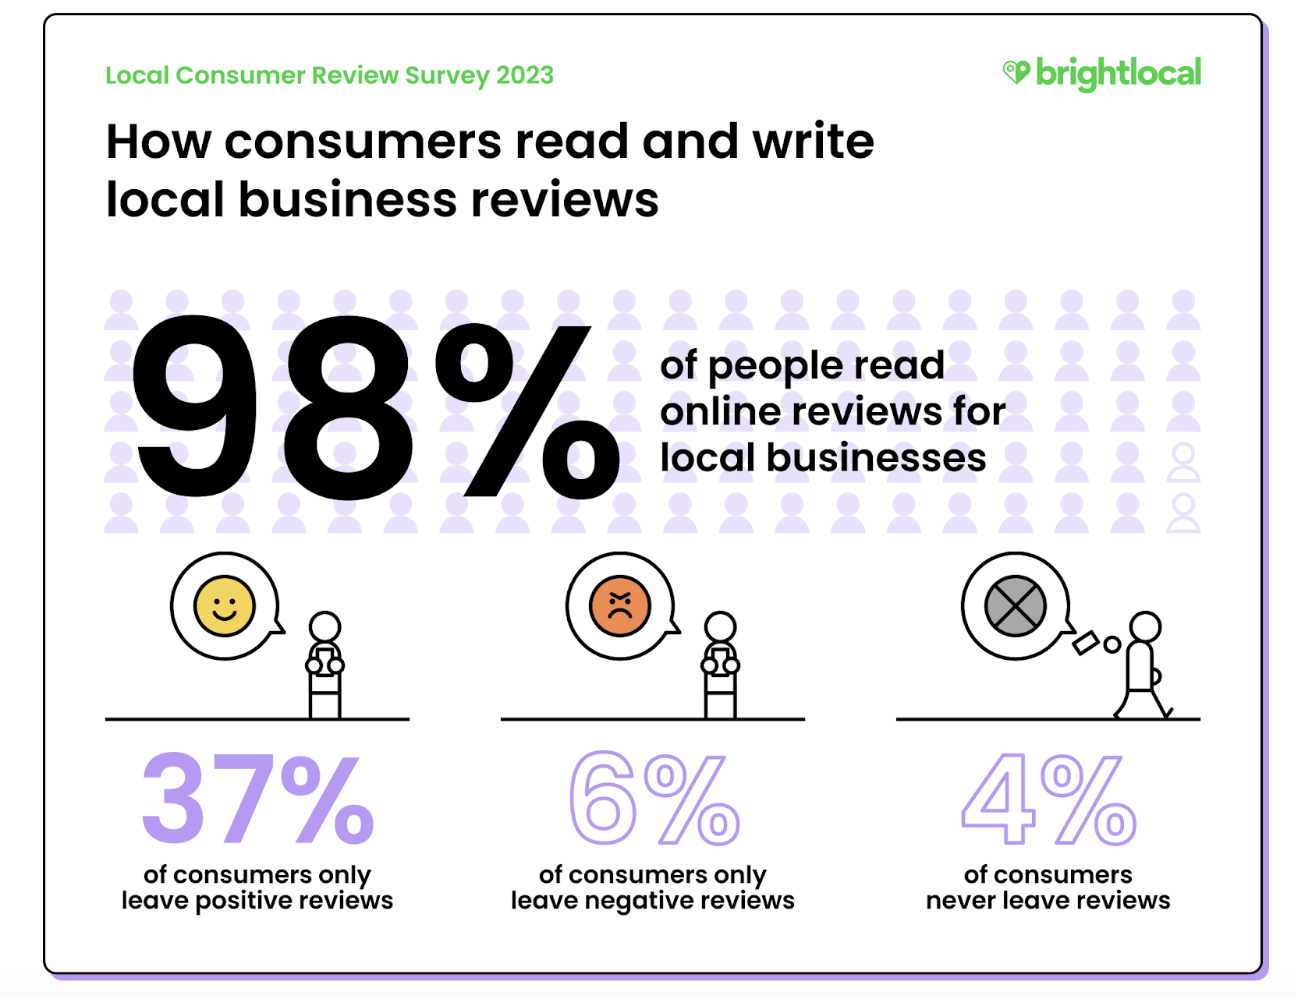 Online reviews strongly influence consumers of local businesses - Brightlocal